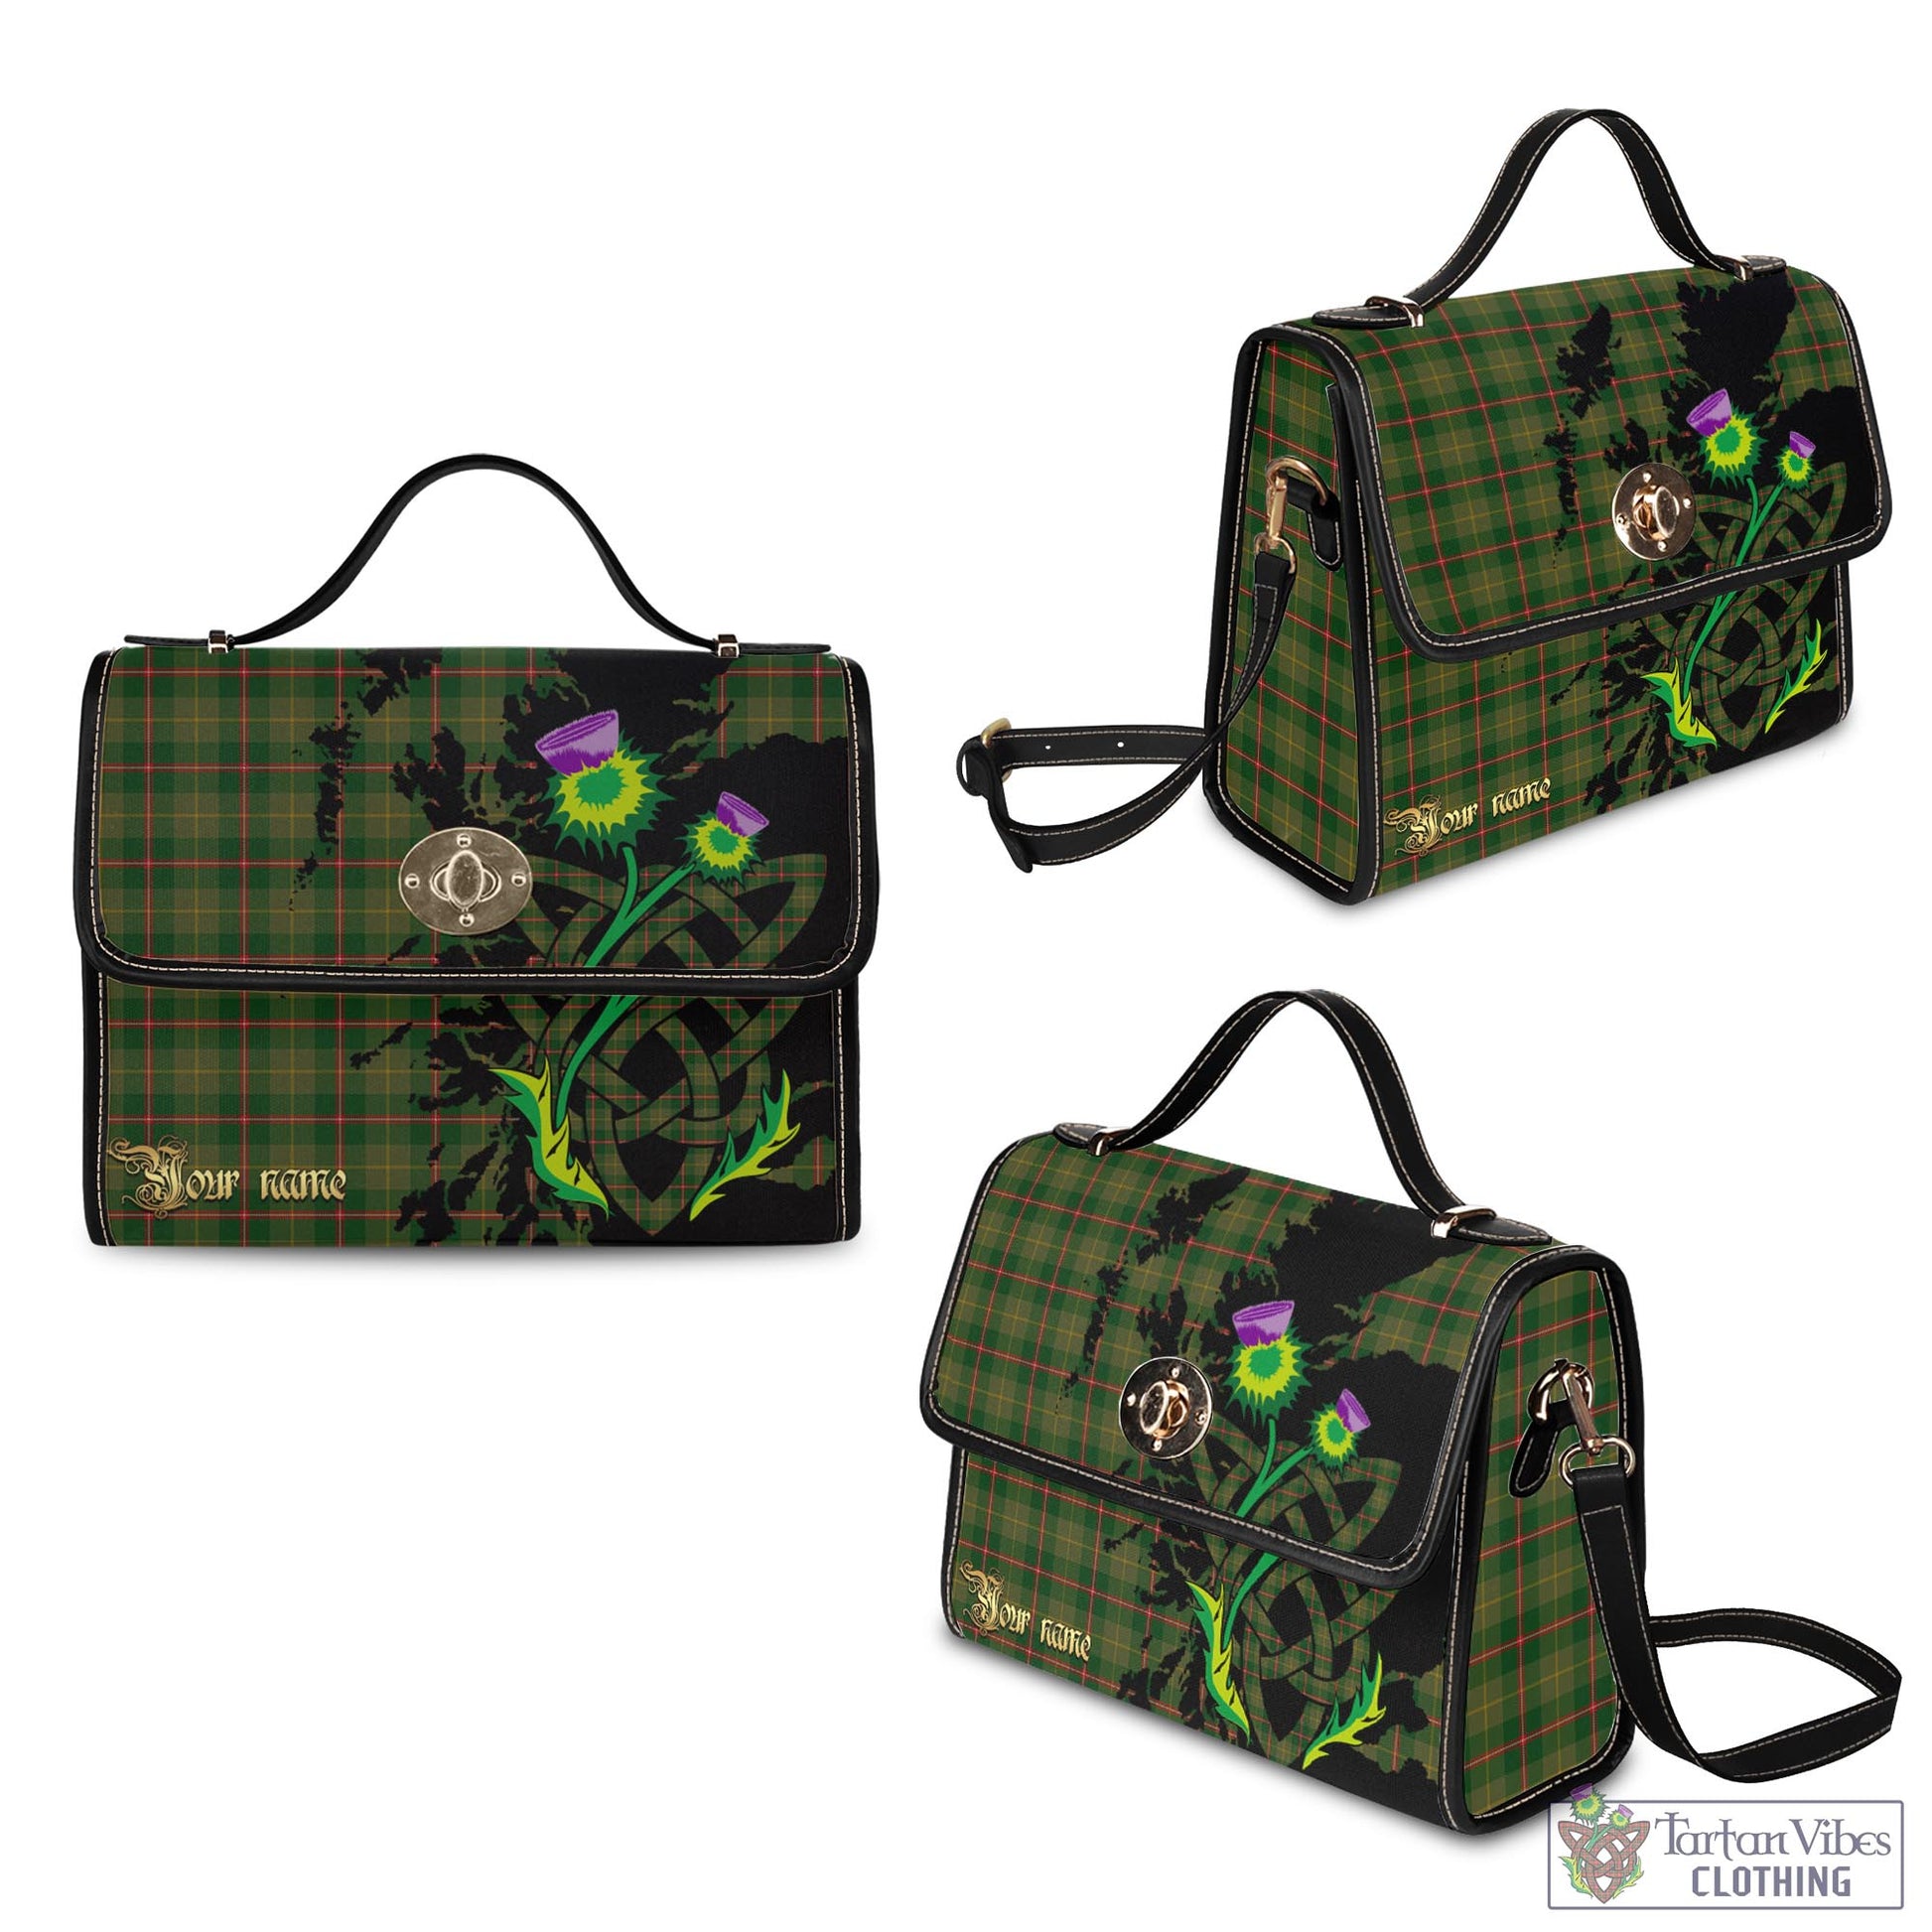 Tartan Vibes Clothing Symington Tartan Waterproof Canvas Bag with Scotland Map and Thistle Celtic Accents